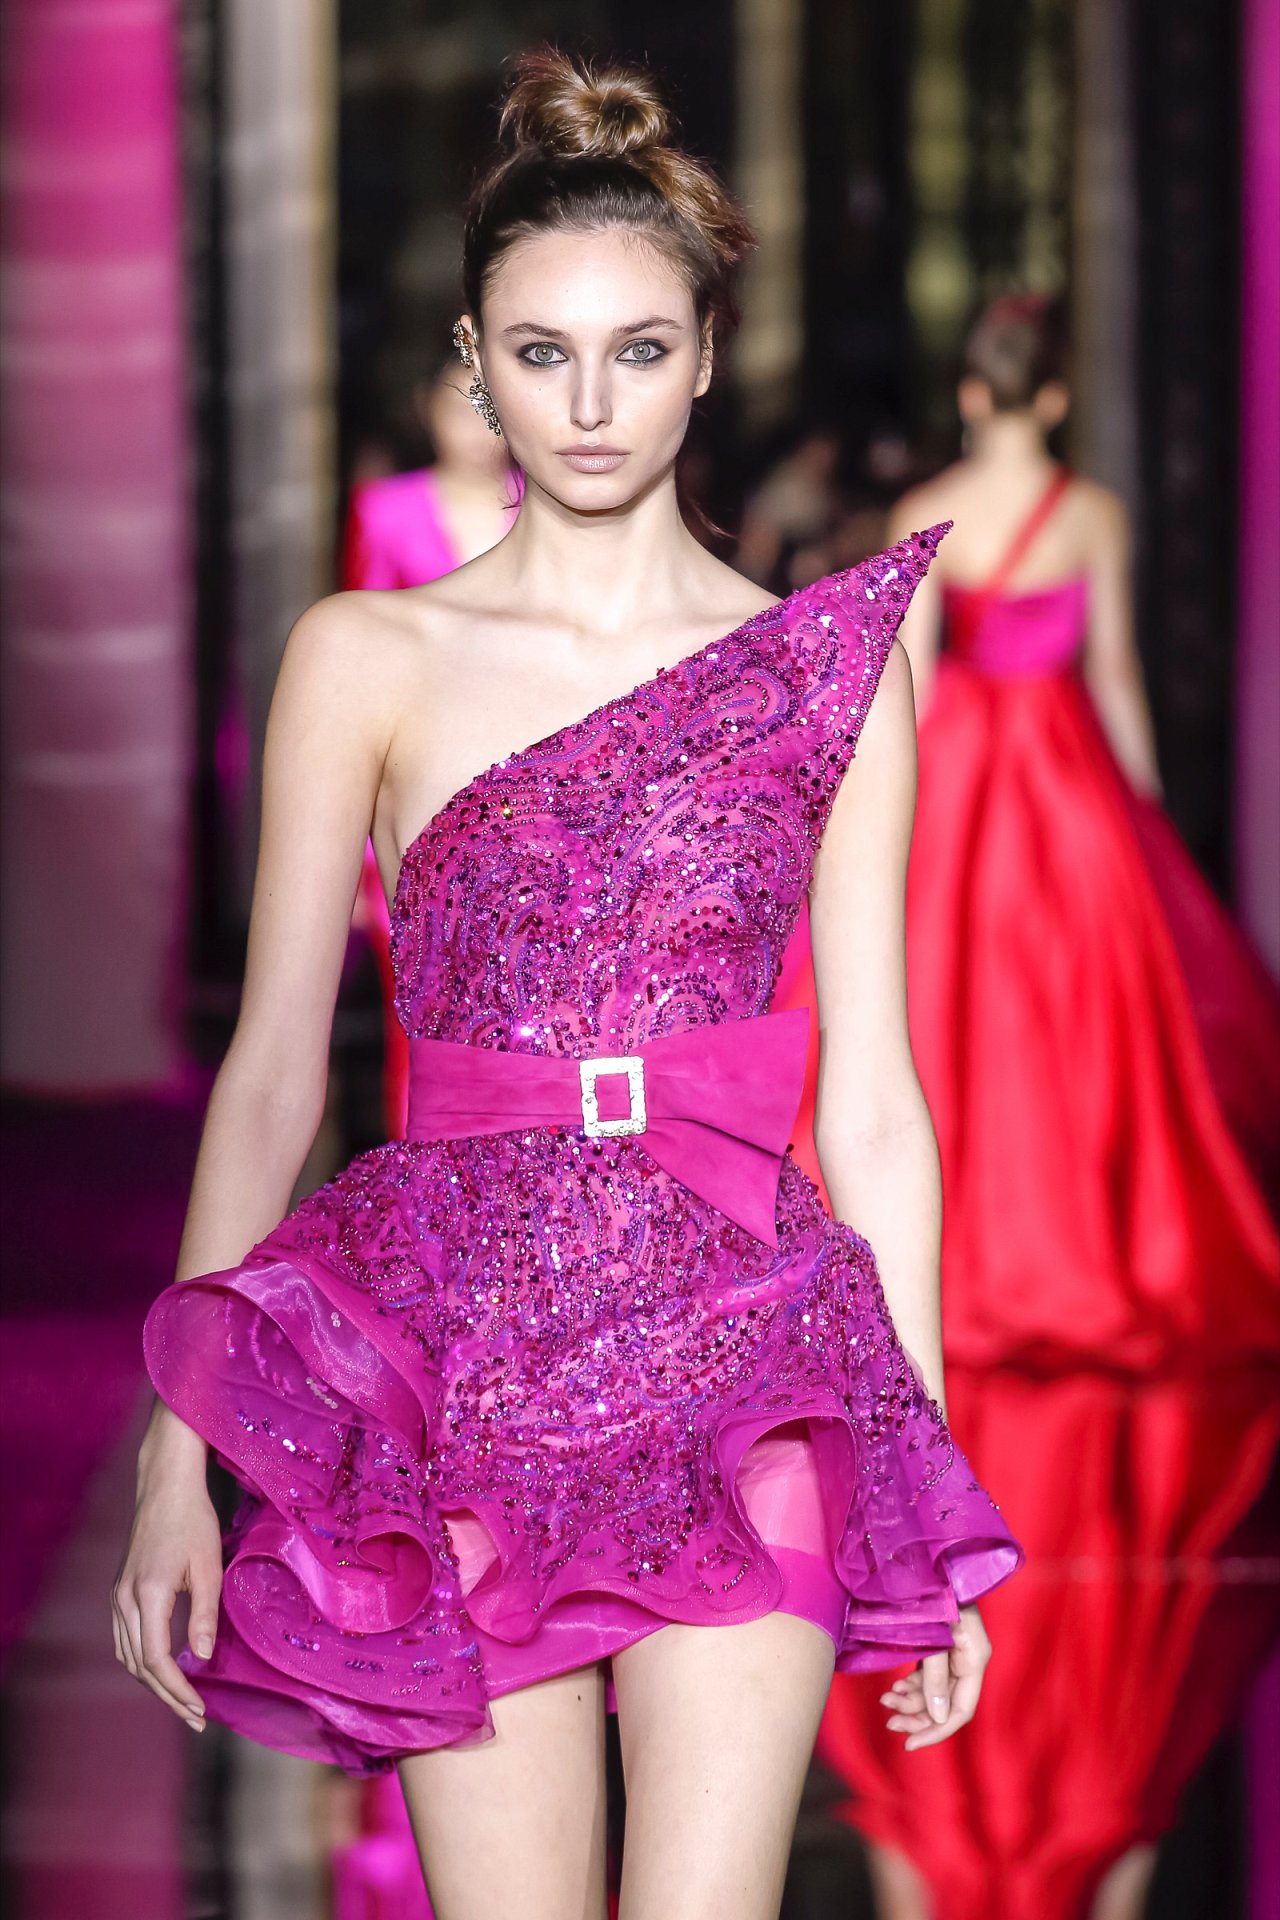 Long dress rendered in fuchsia lace showered with pink crystals